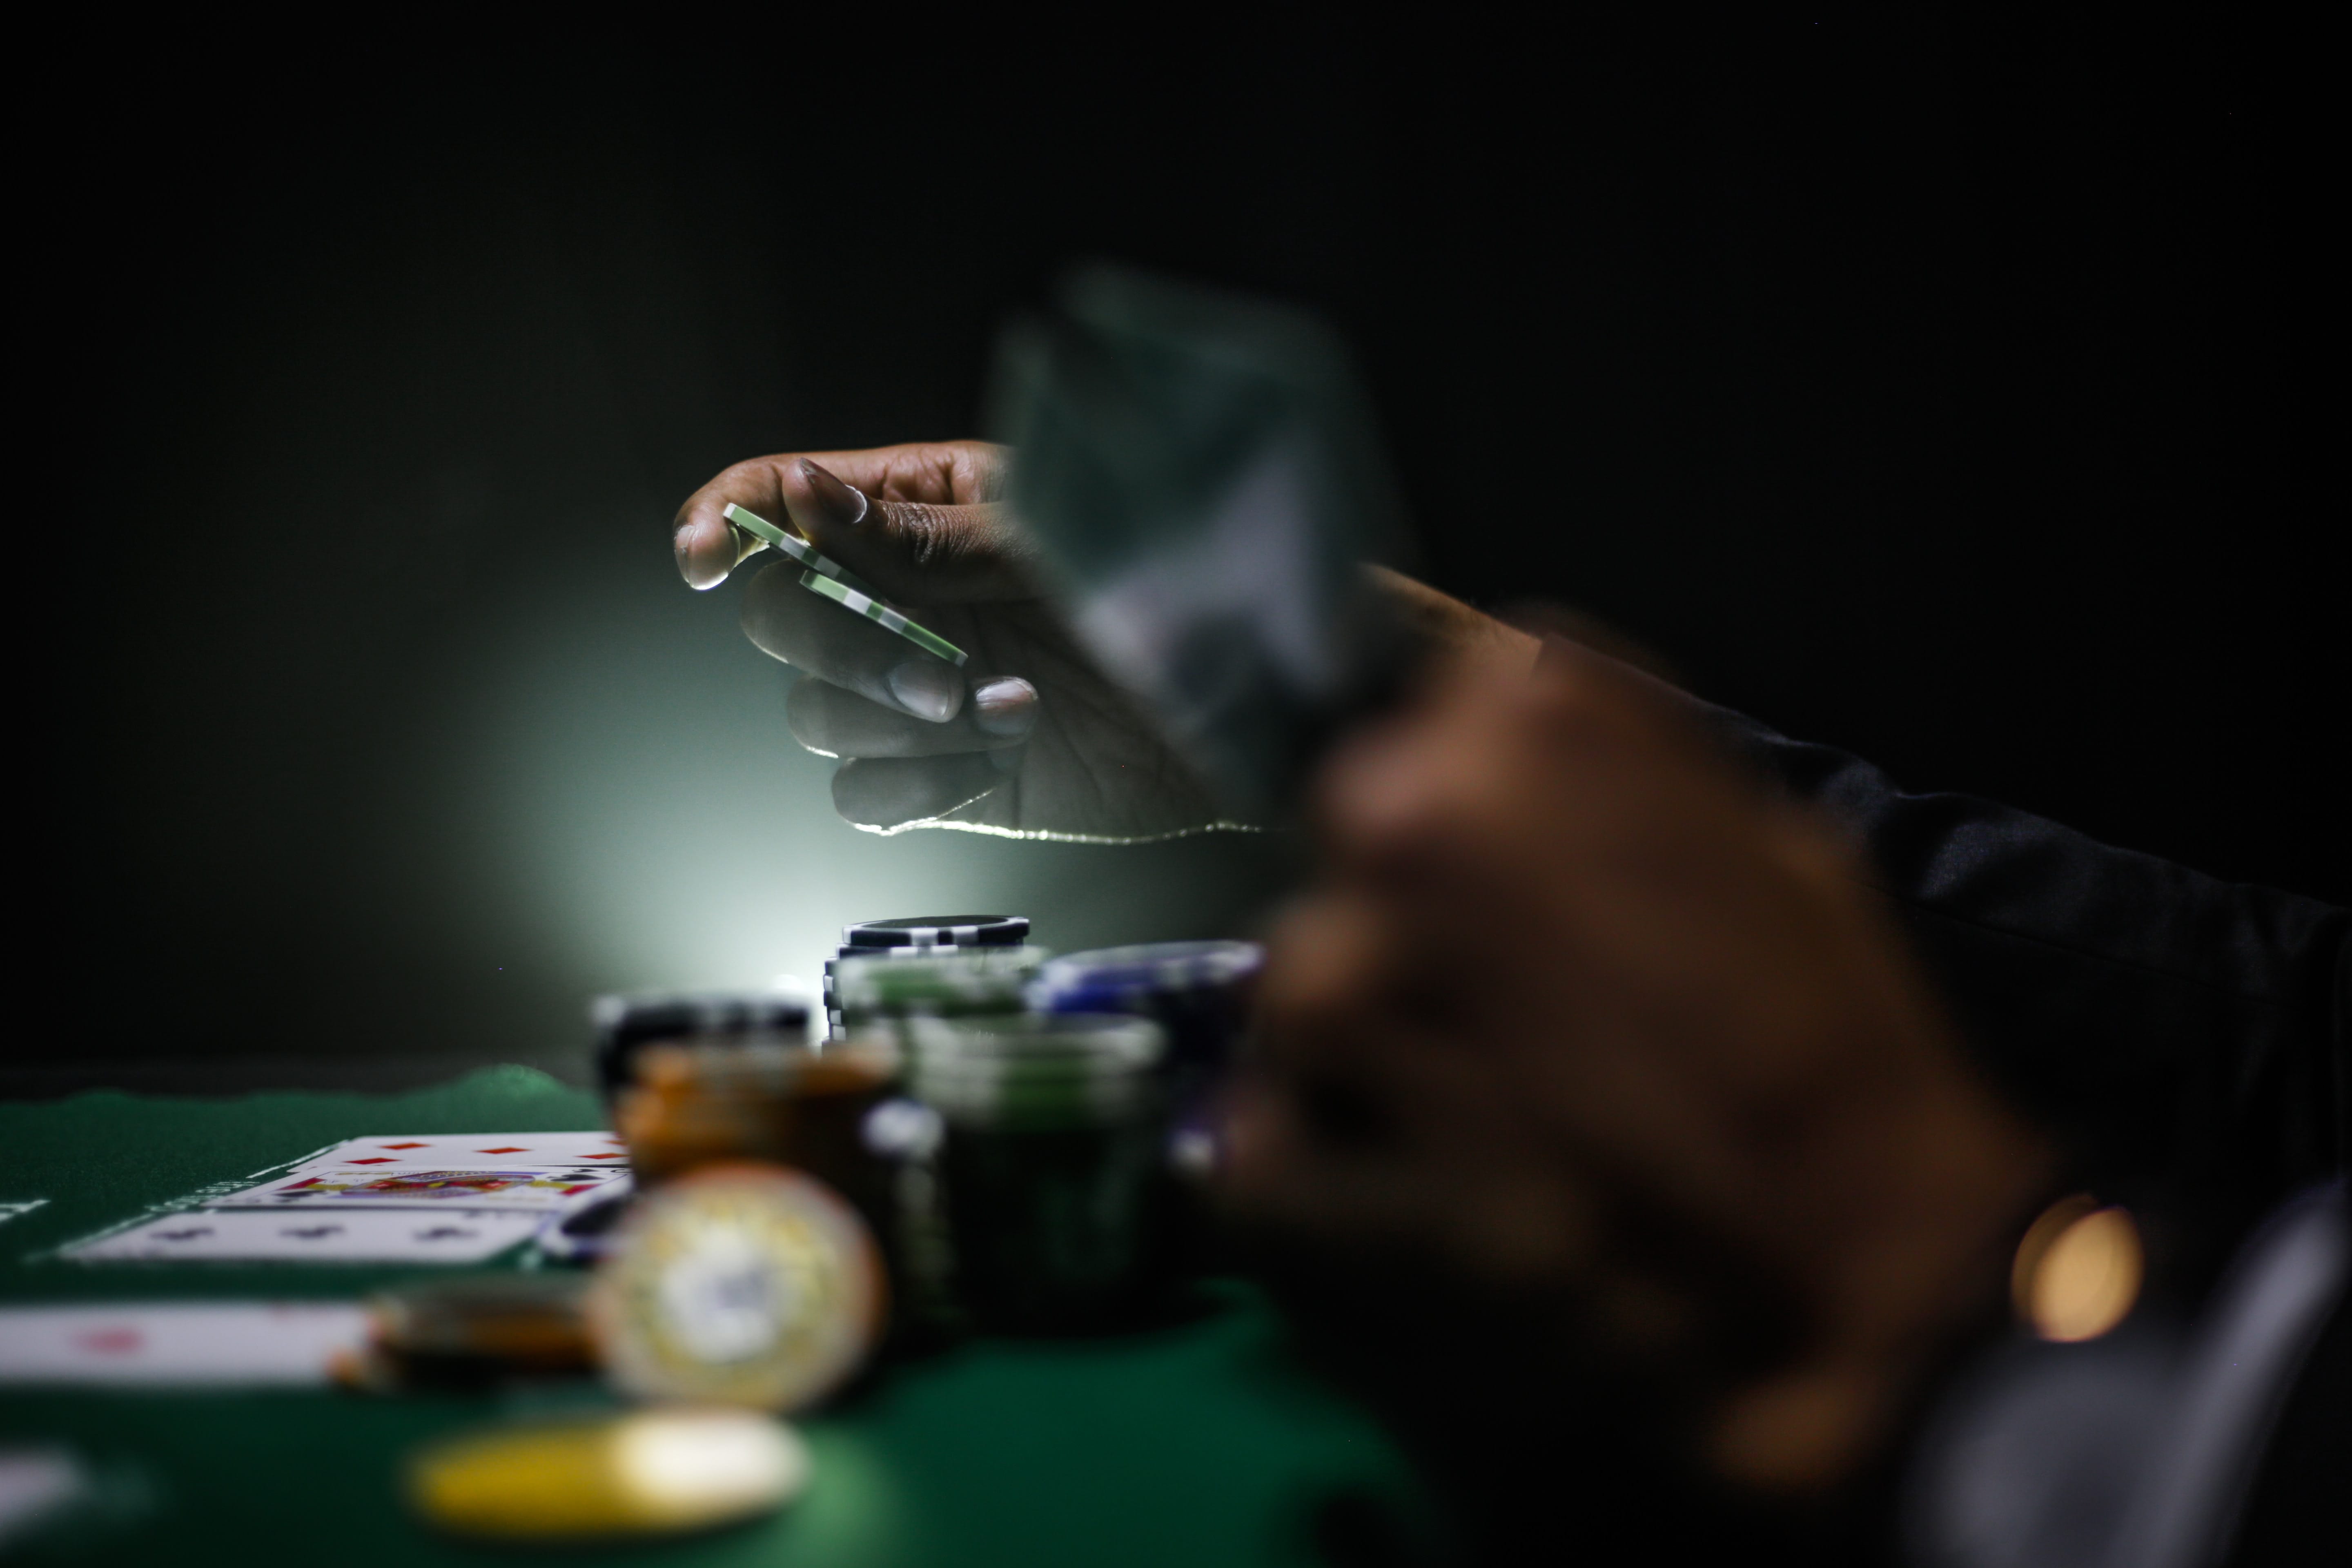 Selective focus photography of poker chips; image by Keenan Constance, via Unsplash.com.